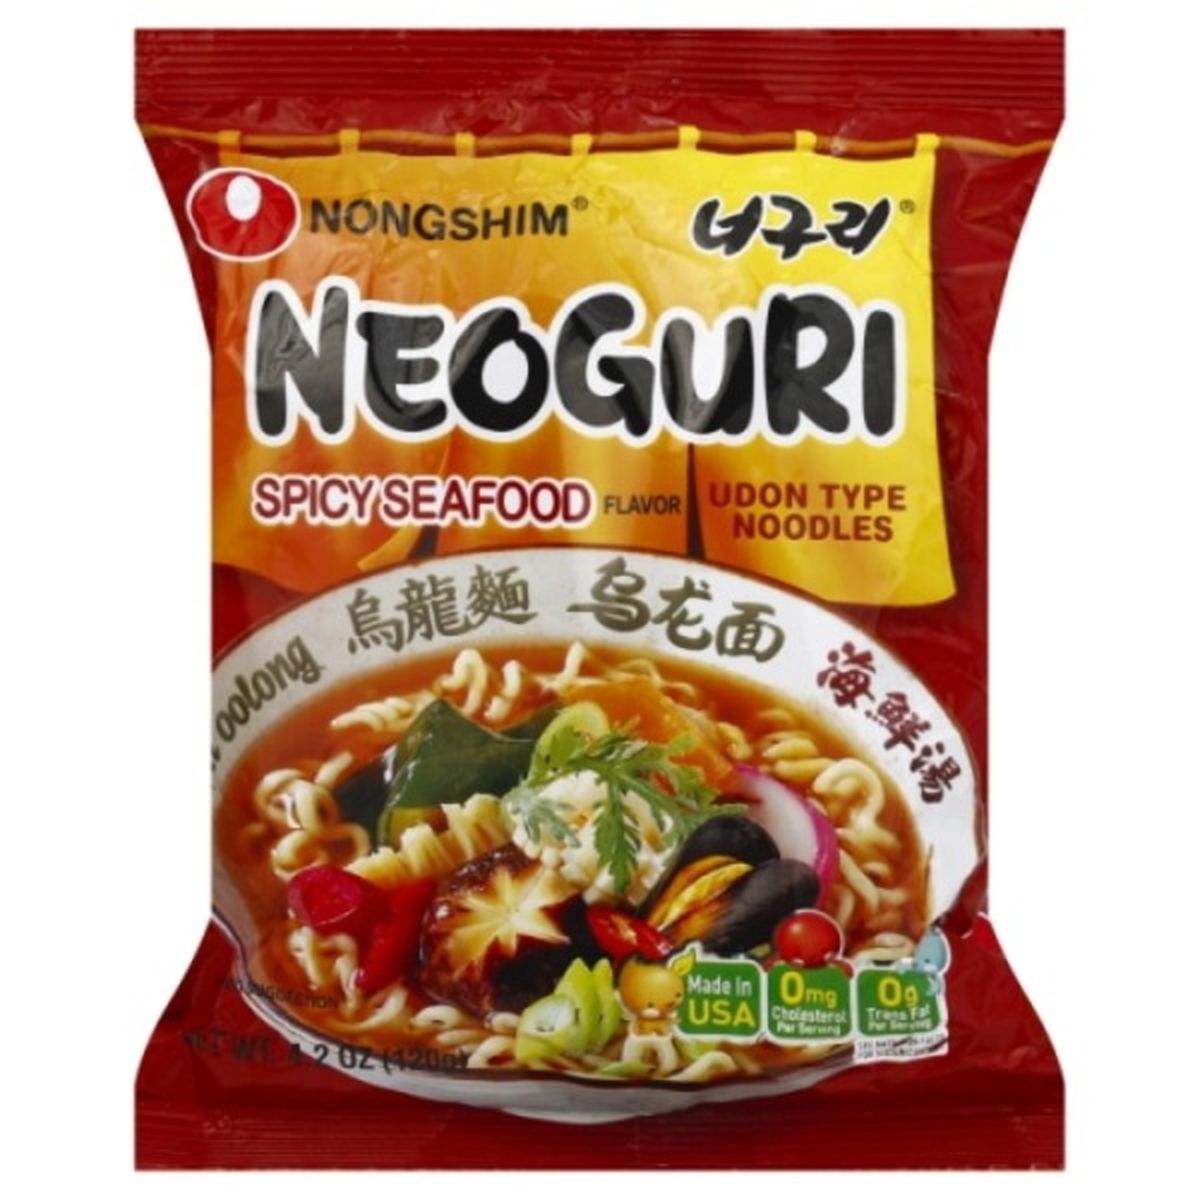 Calories in Nongshim Udon Type Noodles, Spicy Seafood Flavor